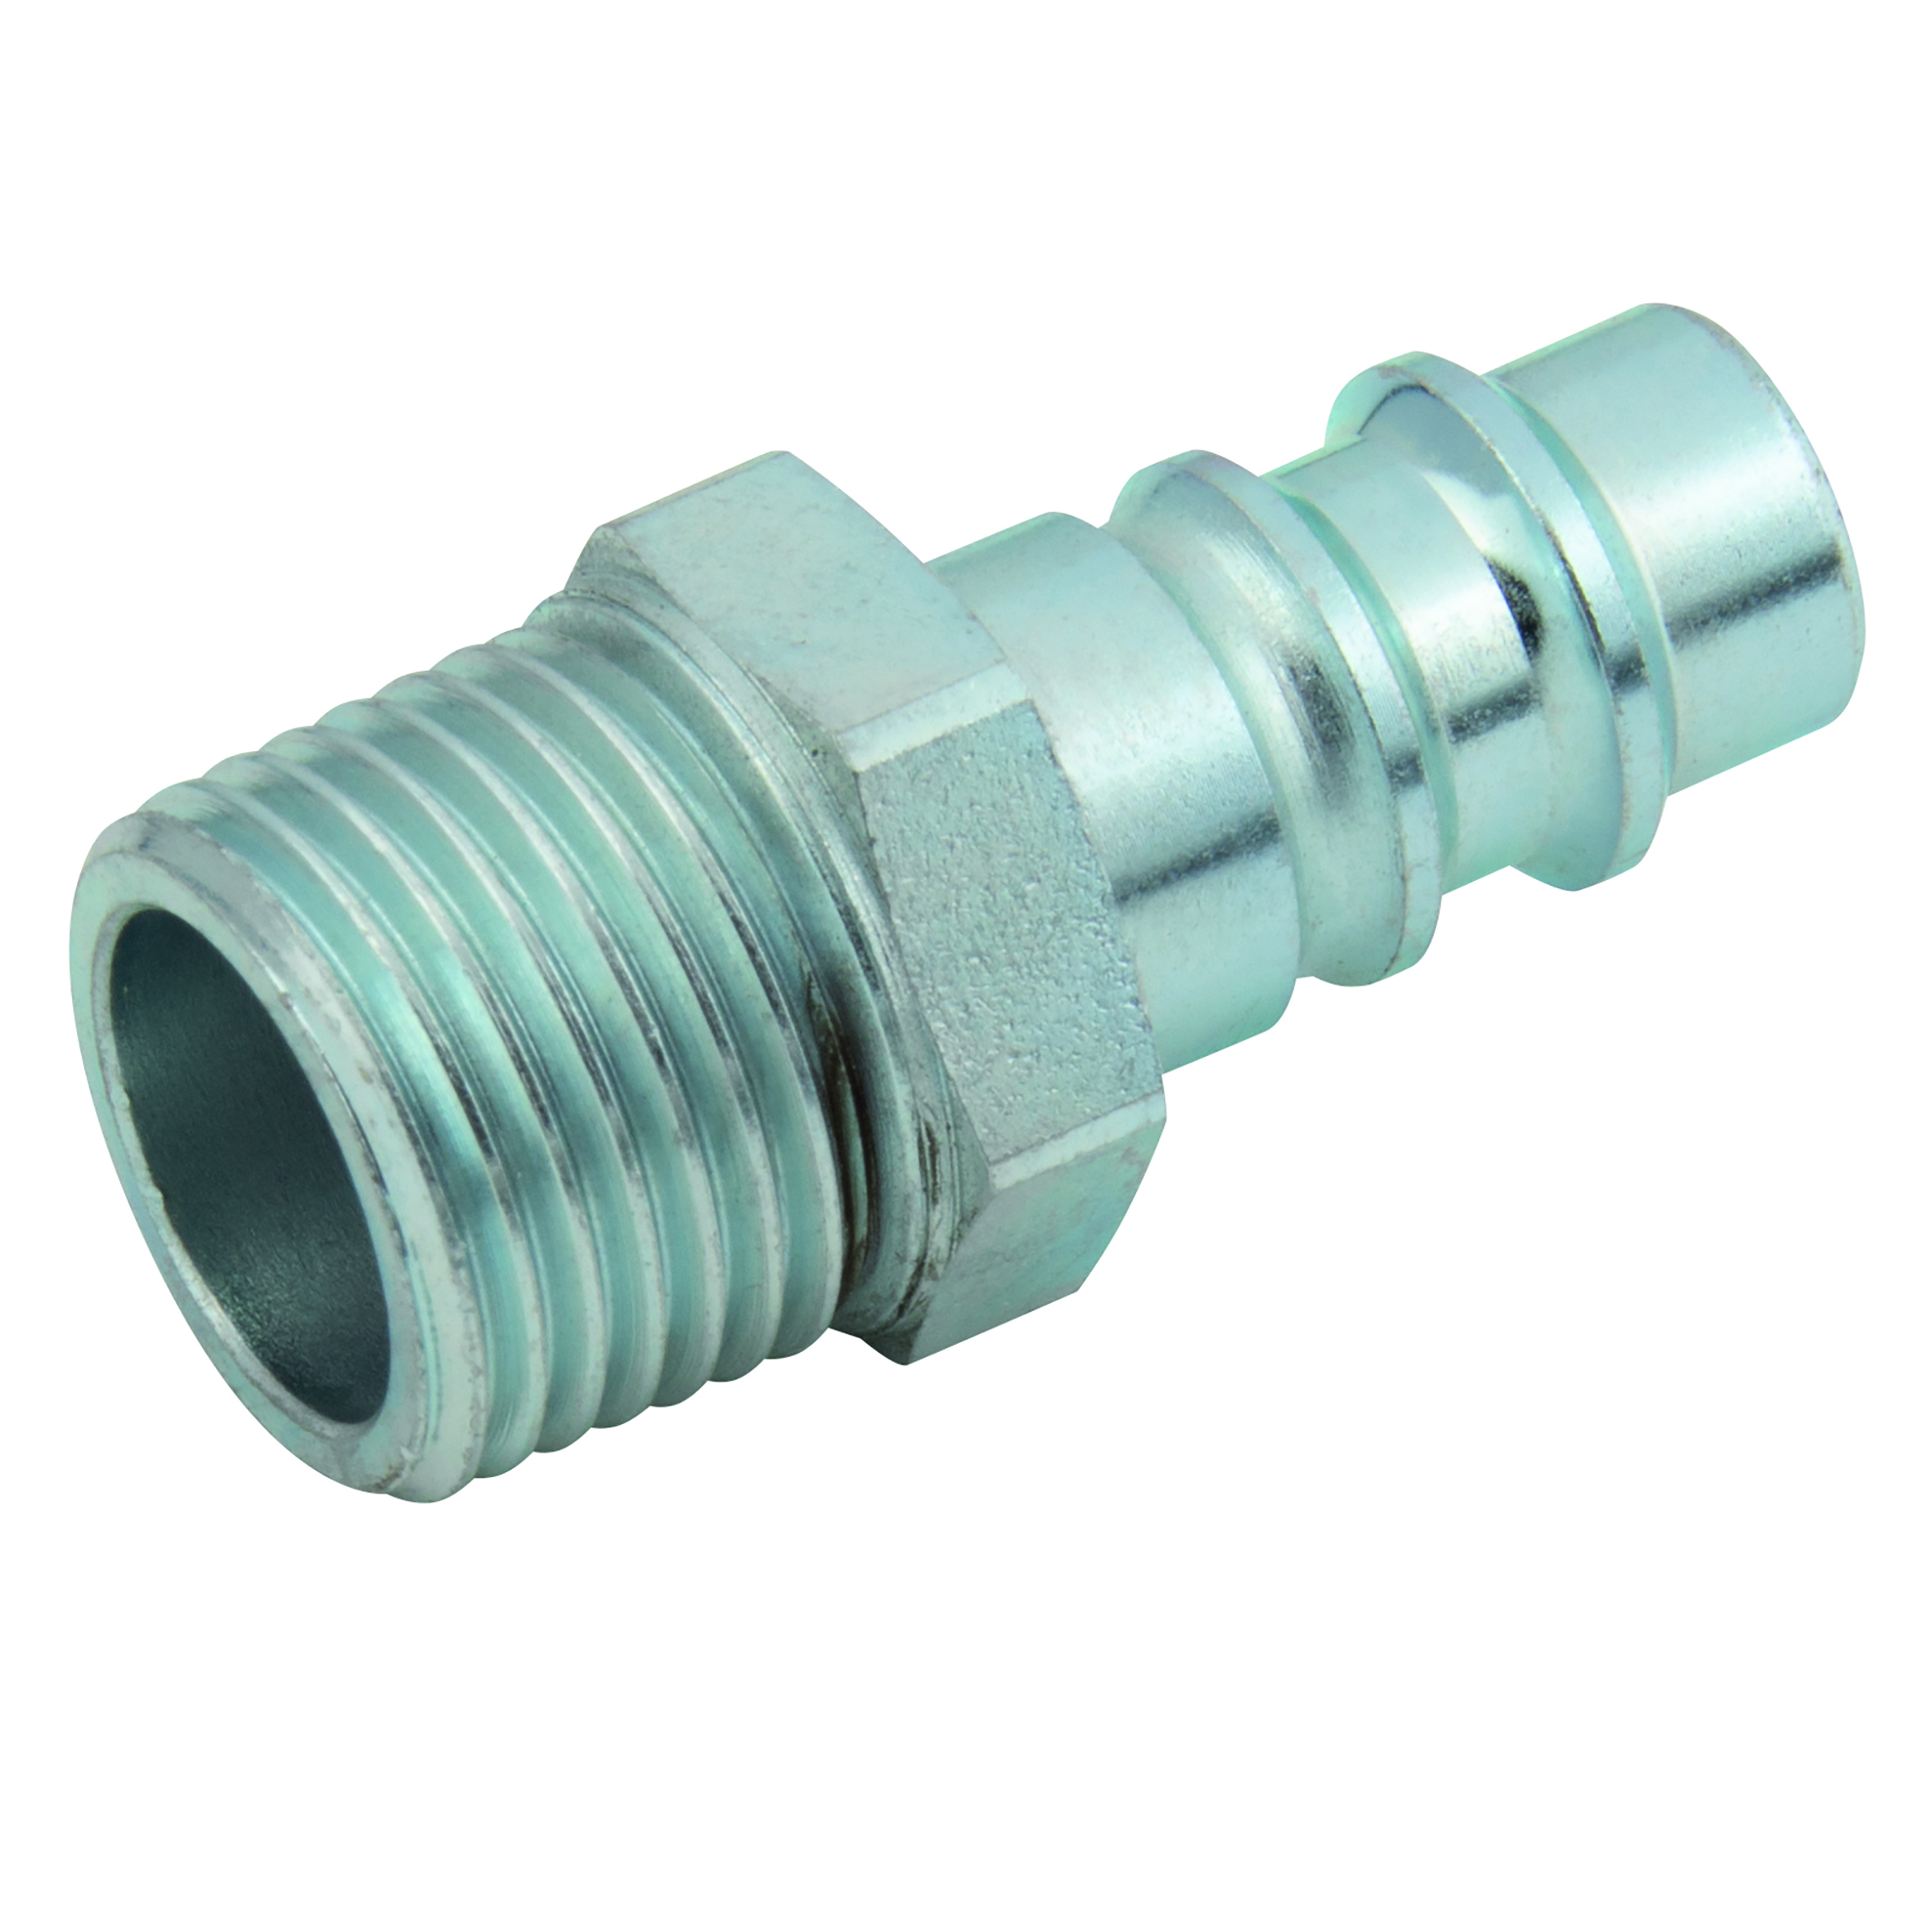 1/2' BSPT MALE SAFETY PLUG